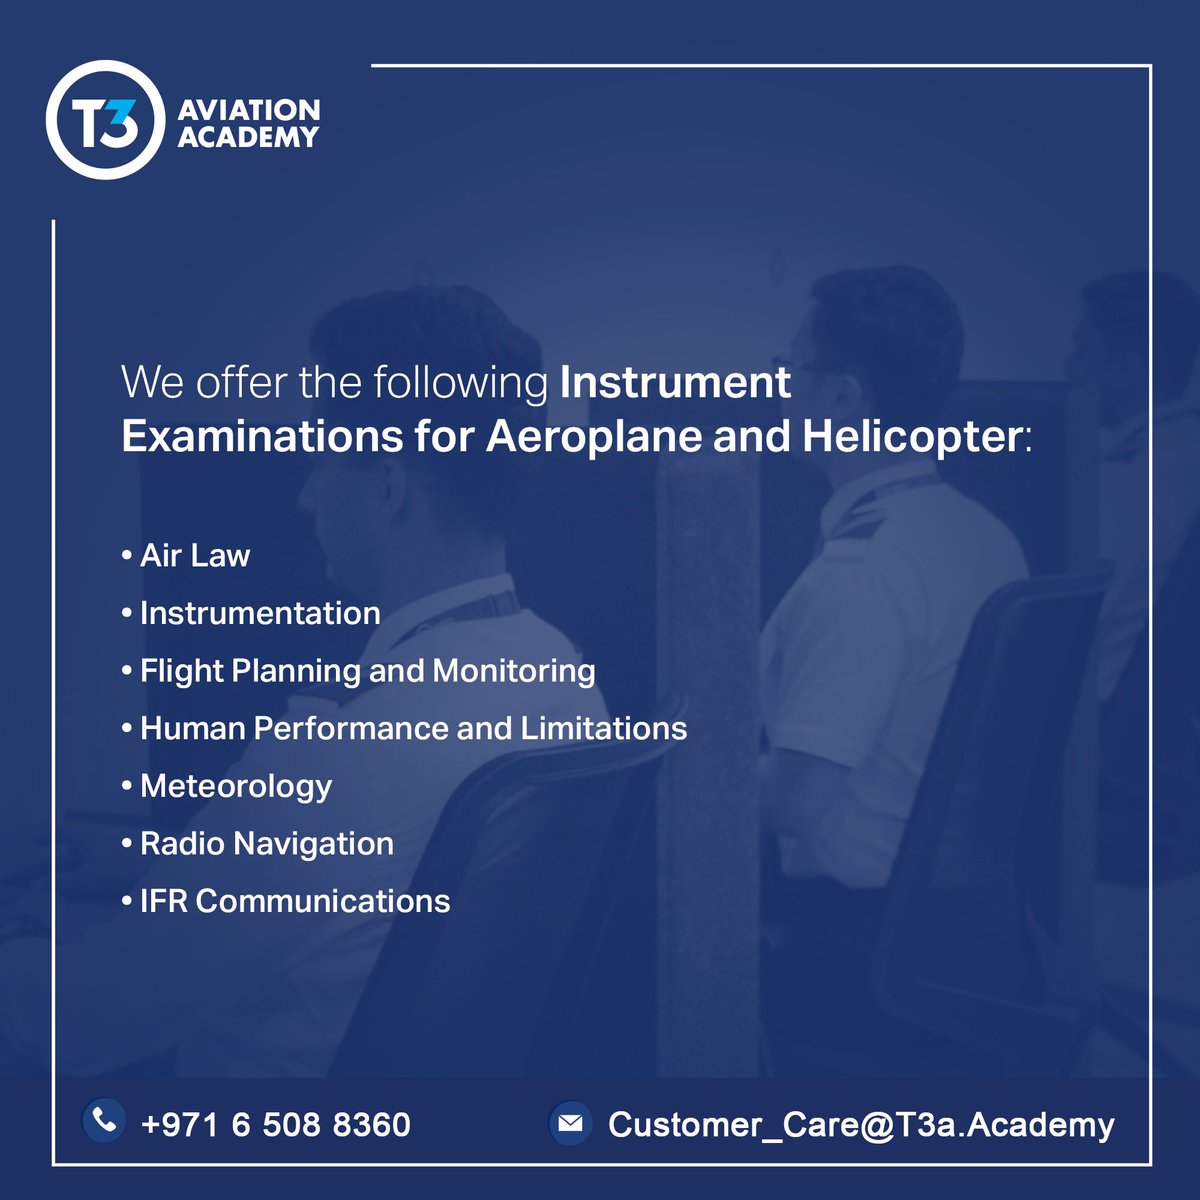 Our state-of-the-art GCAA-approved Examination Centre is highly conducive to focusing and concentrating for your exams.

Contact Customer_Care@T3a.Academy for more information.

#GCAA #Examination #Aeroplane #Helicopter #AirLaw #Flight #Radio #Navigation #Meteorology